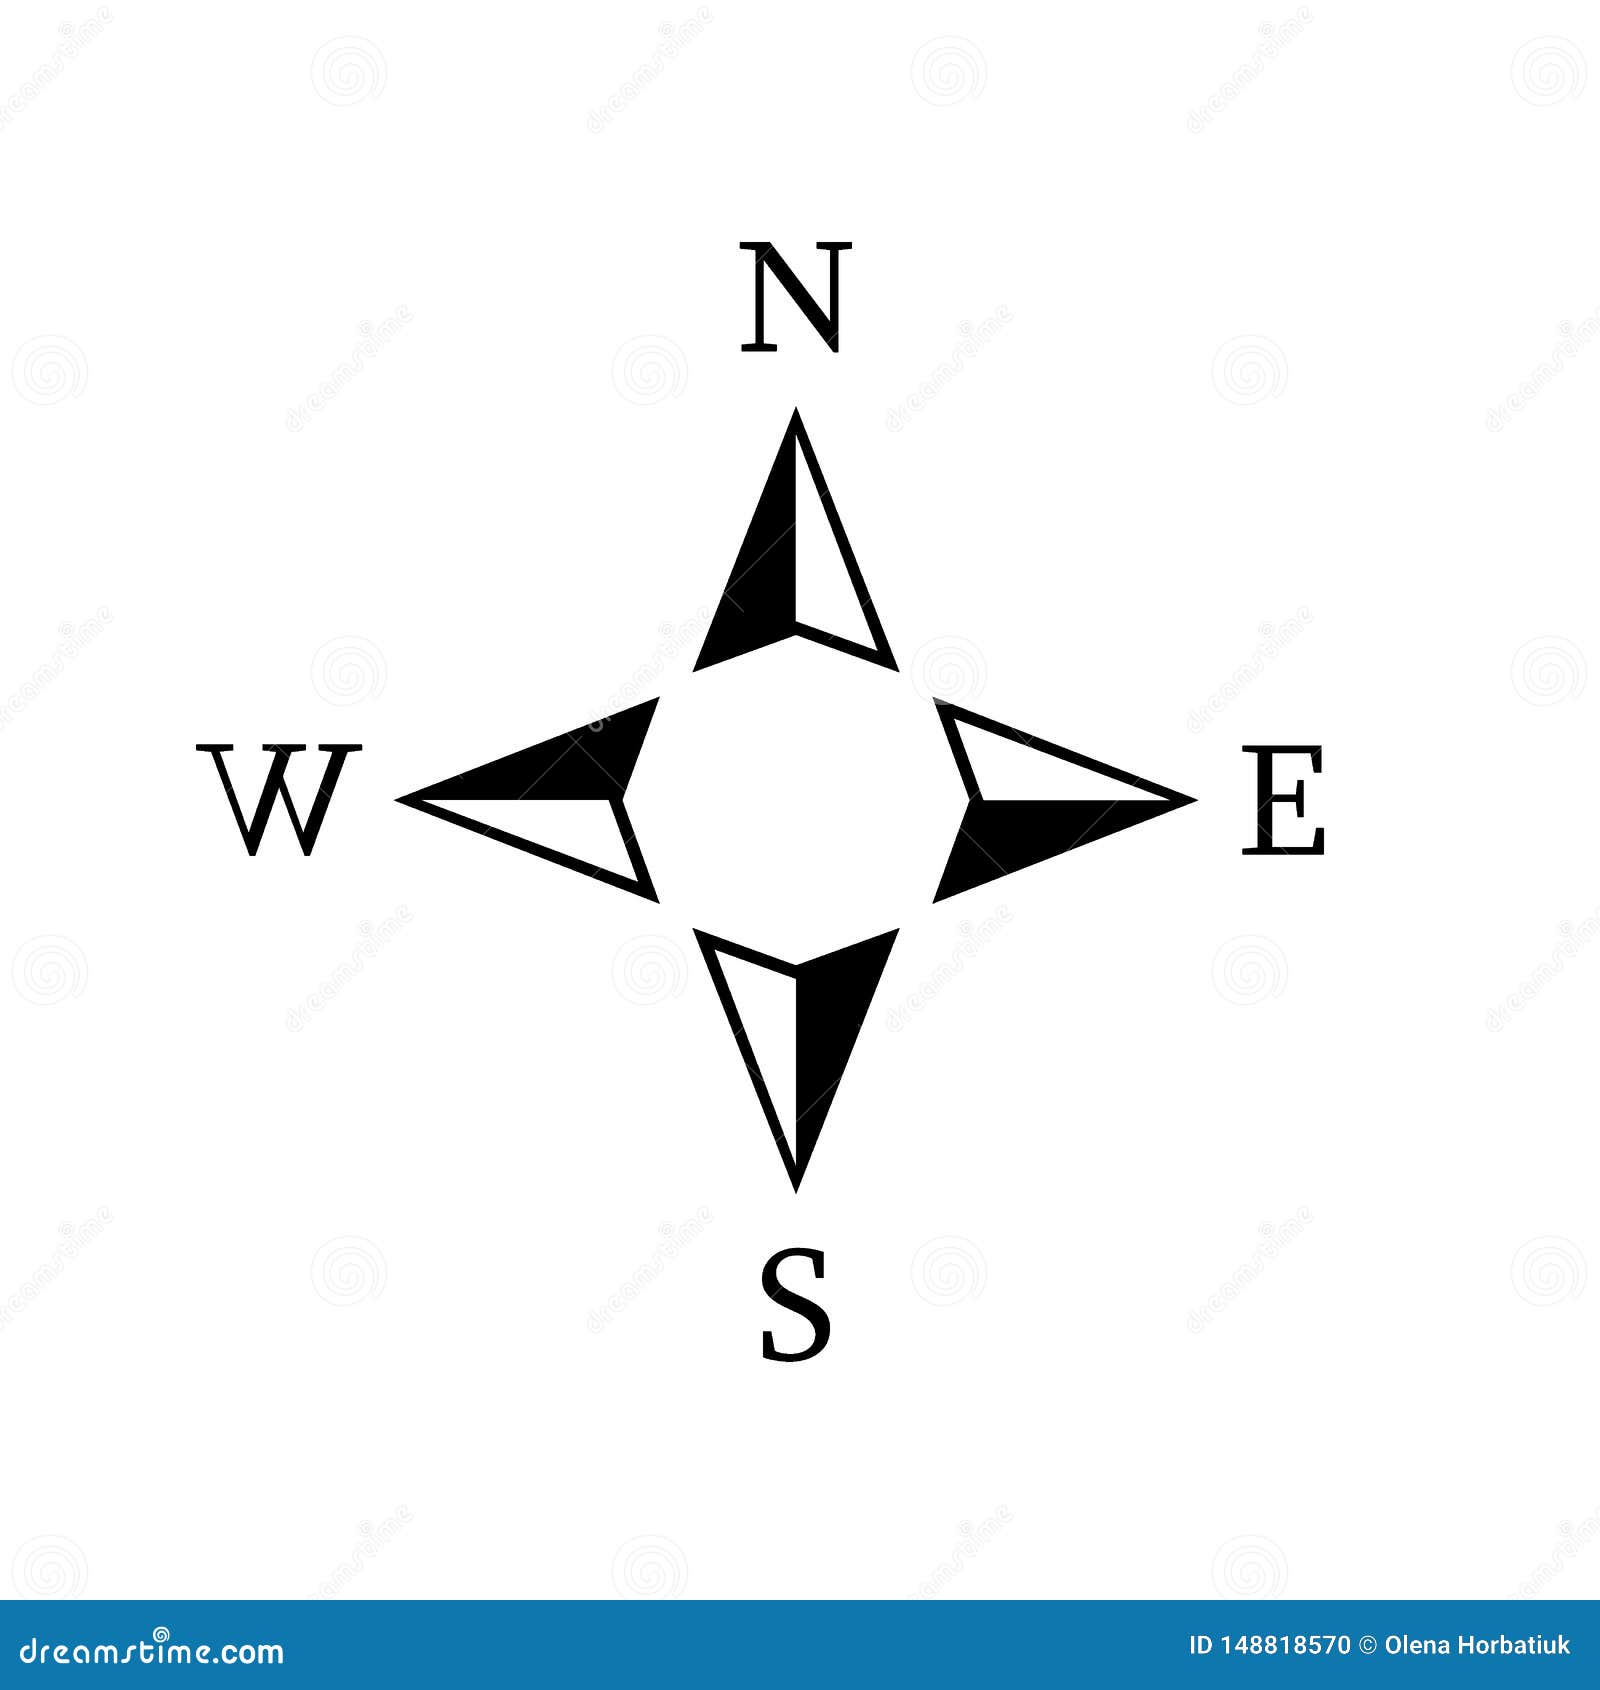  compass rose with north, south, east and west indicated